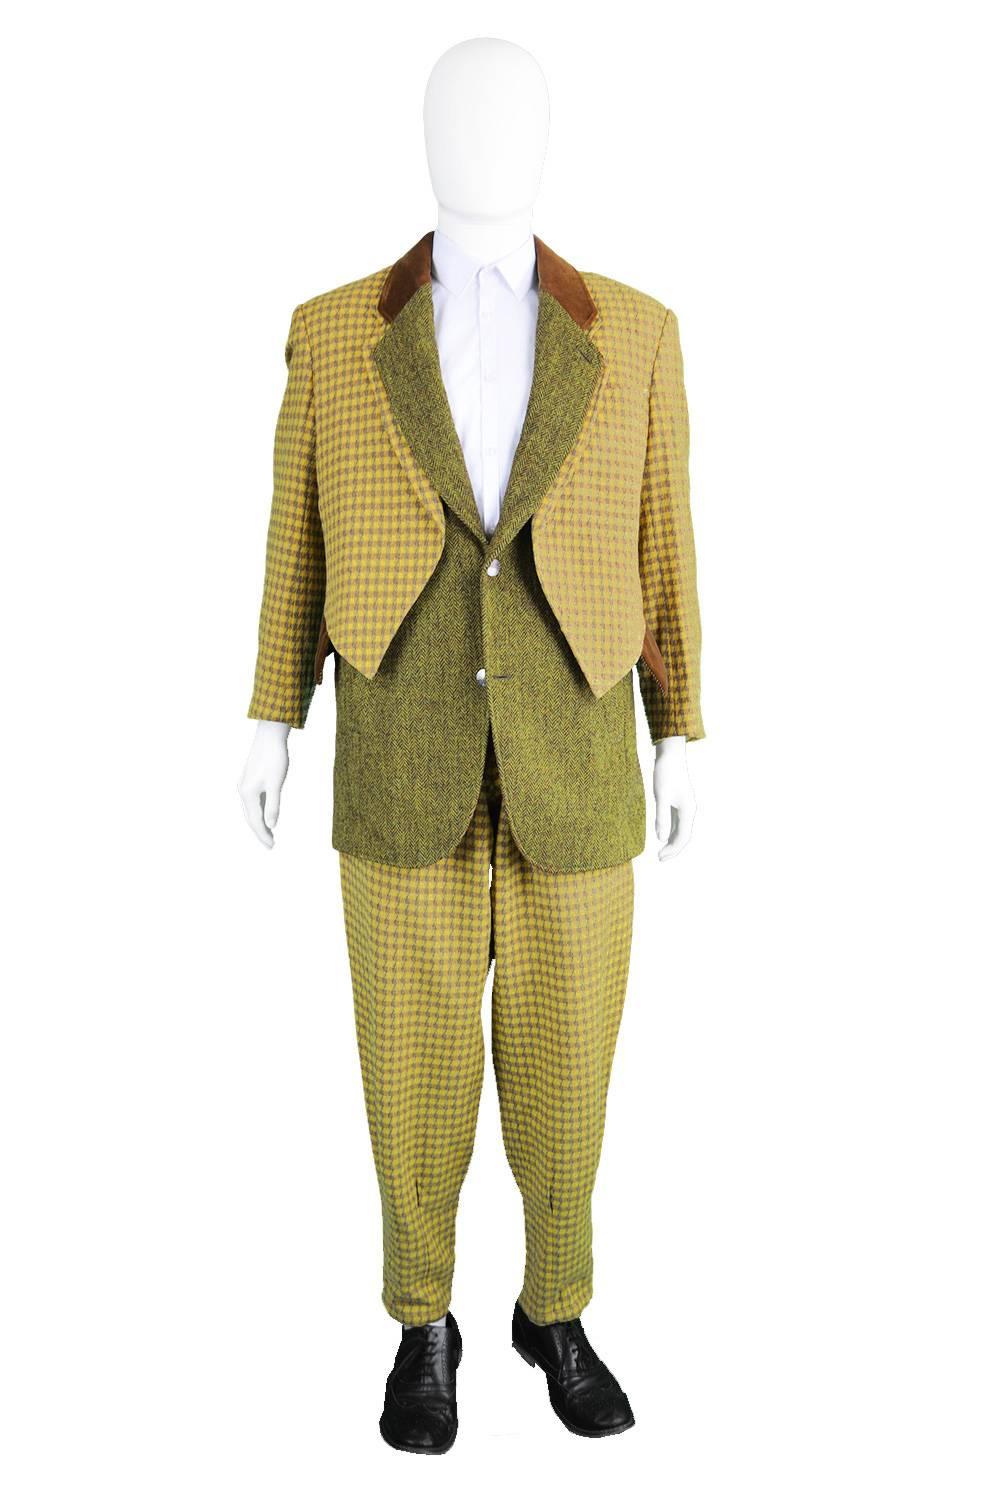 An incredible and avant garde vintage men's or women's suit by genius Japanese designer, Kansai Yamamoto, who was also David Bowie's favourite designer and was known for his pioneering and daring designs, mixing Japanese and Western fashion. This